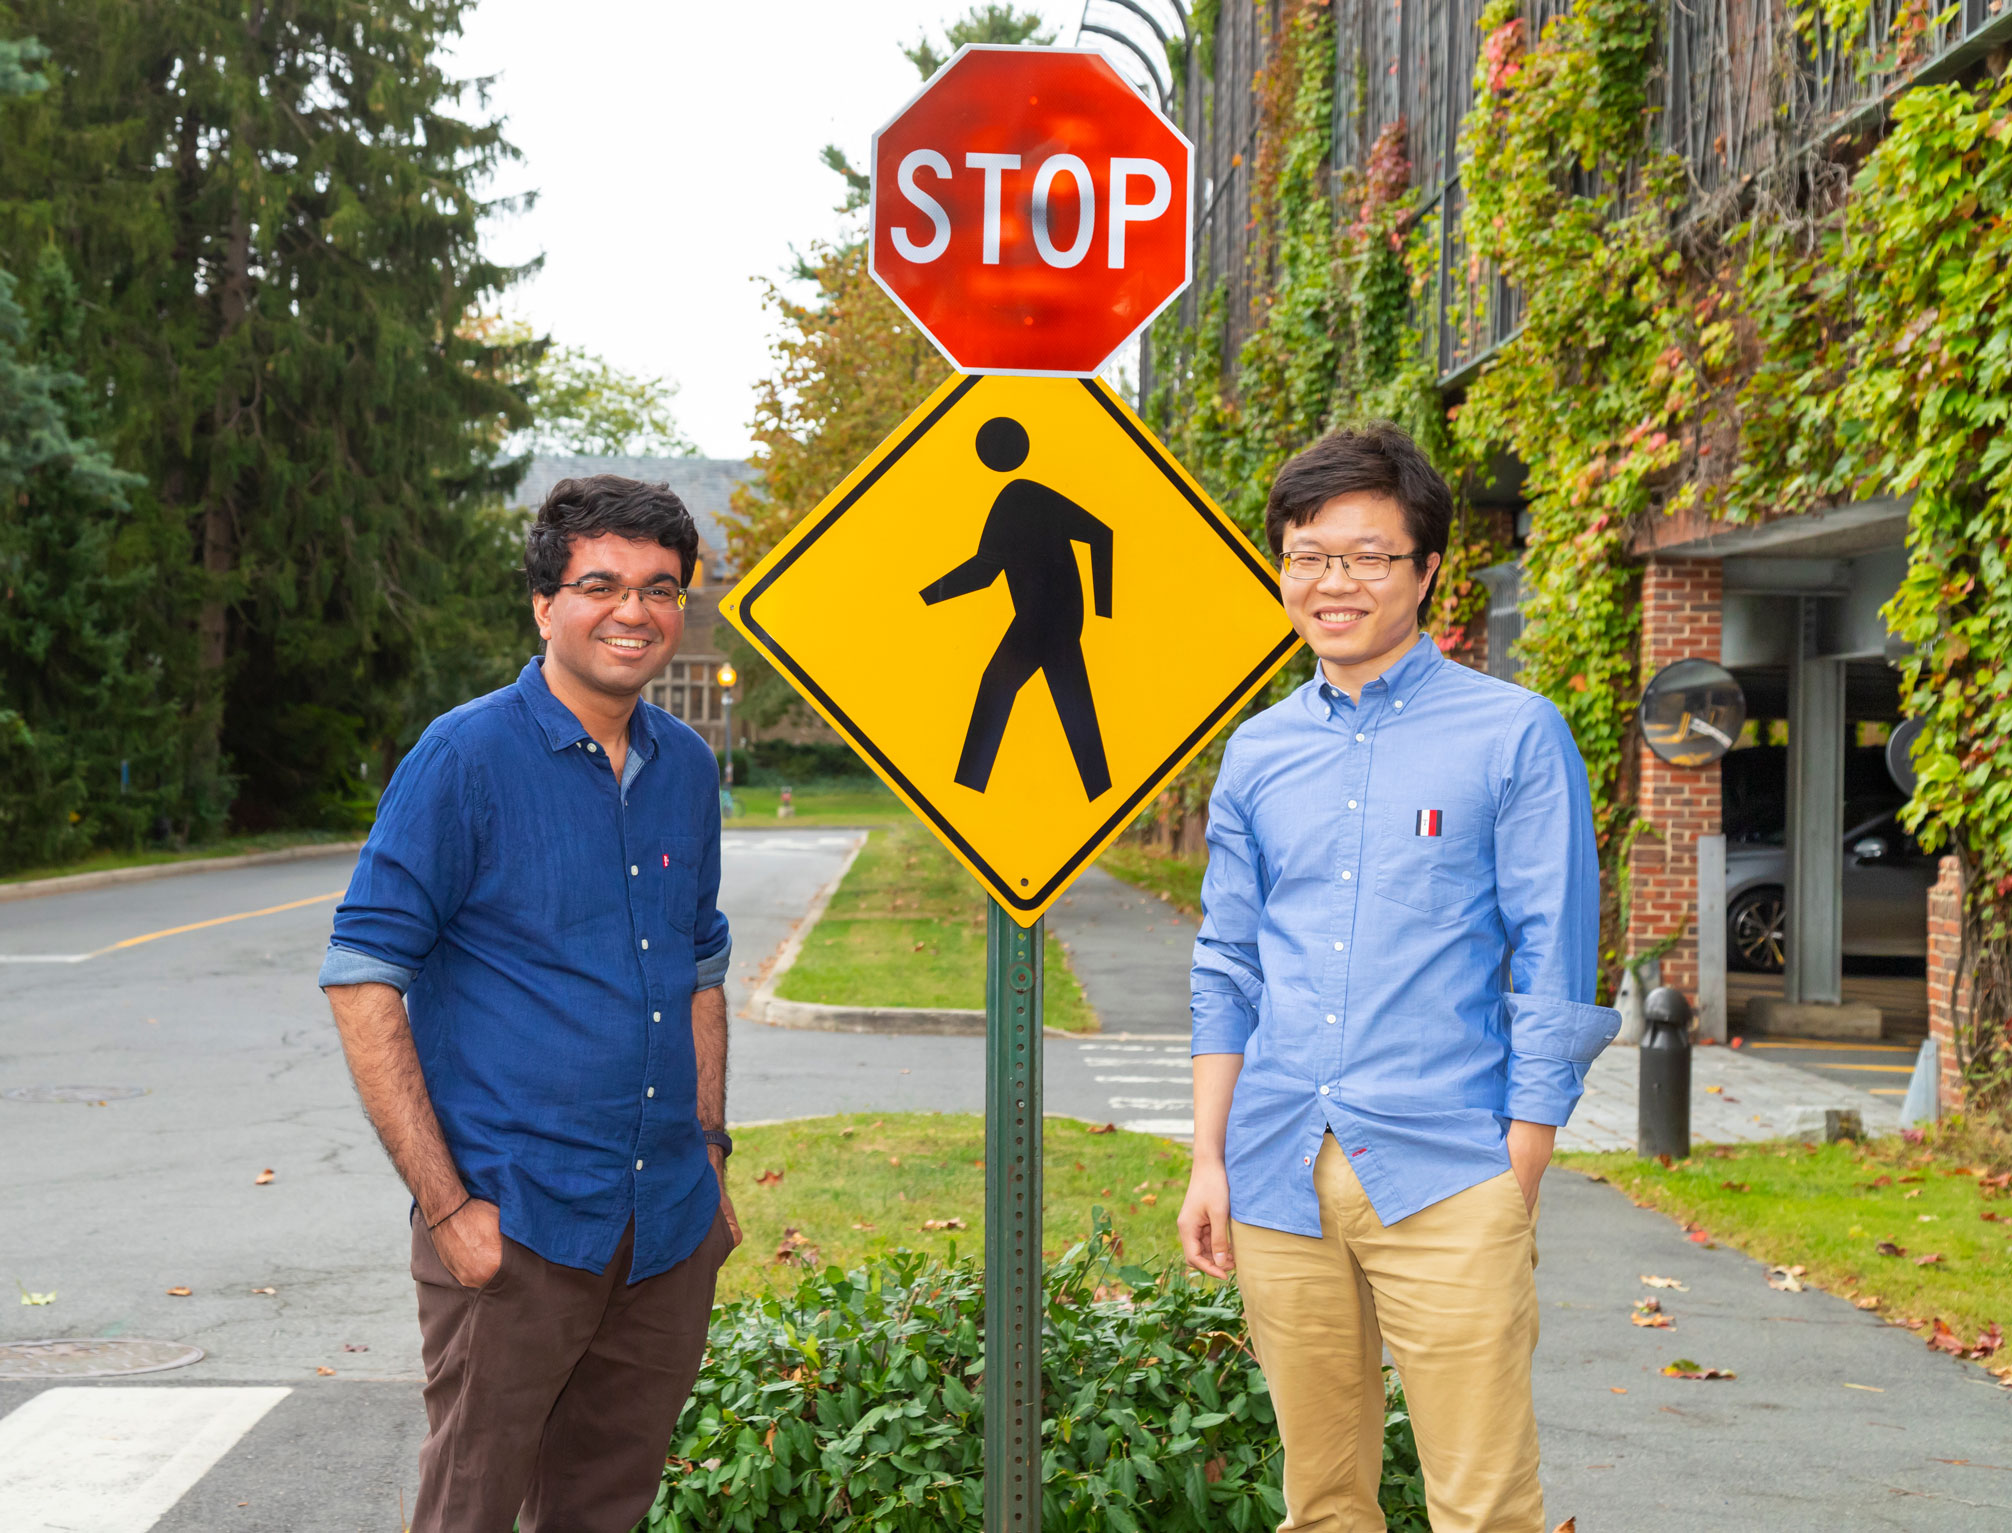 Researchers with stop sign